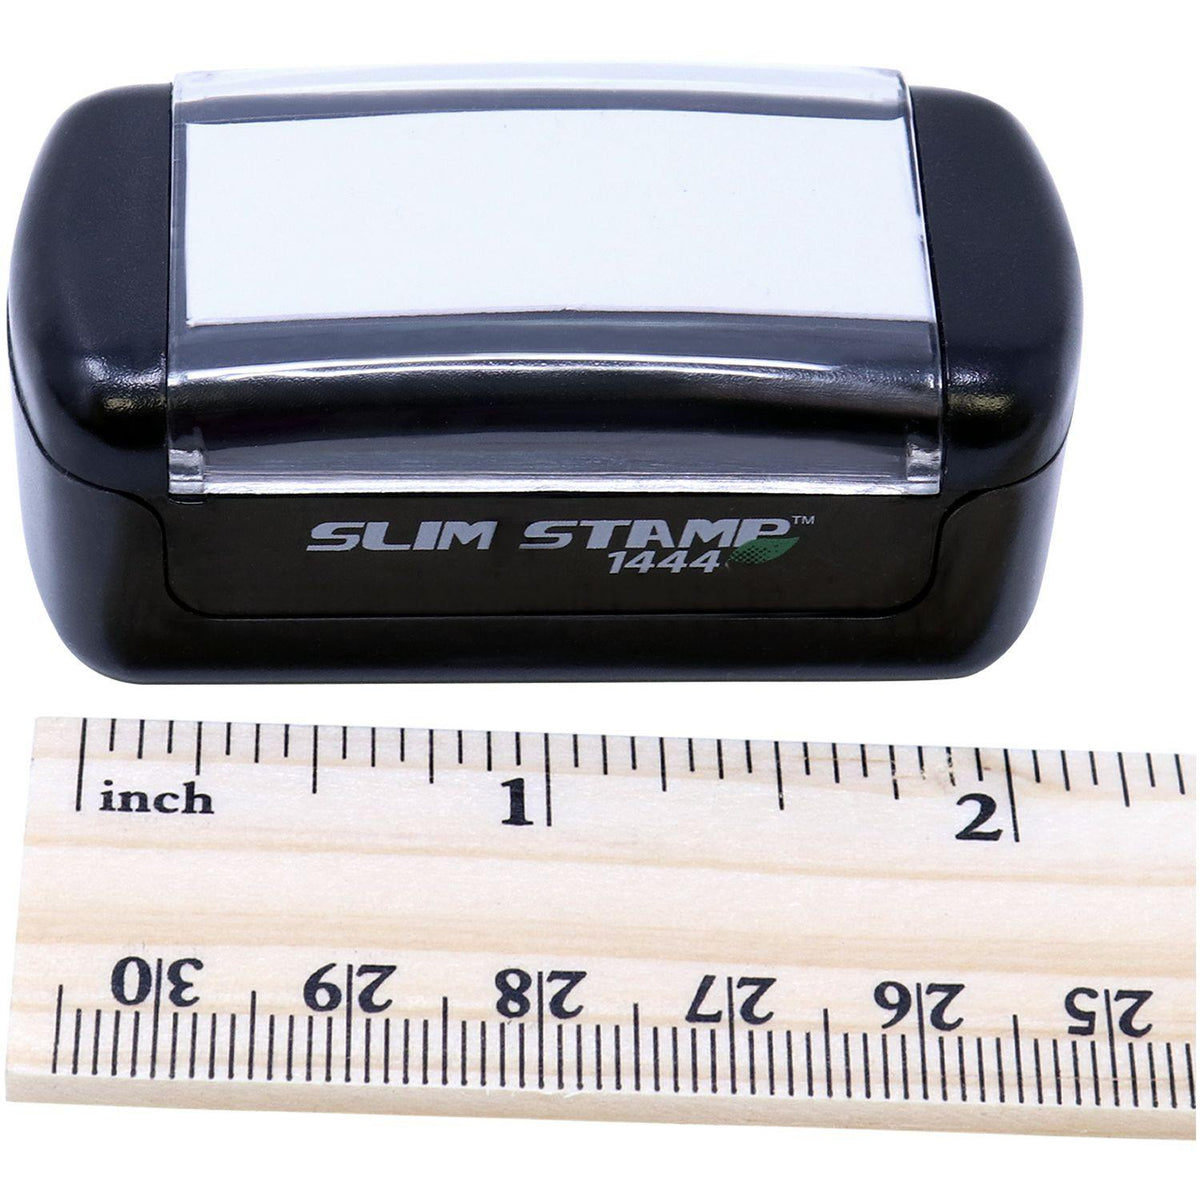 Measurement Slim Pre-Inked E-Mail Stamp with Ruler